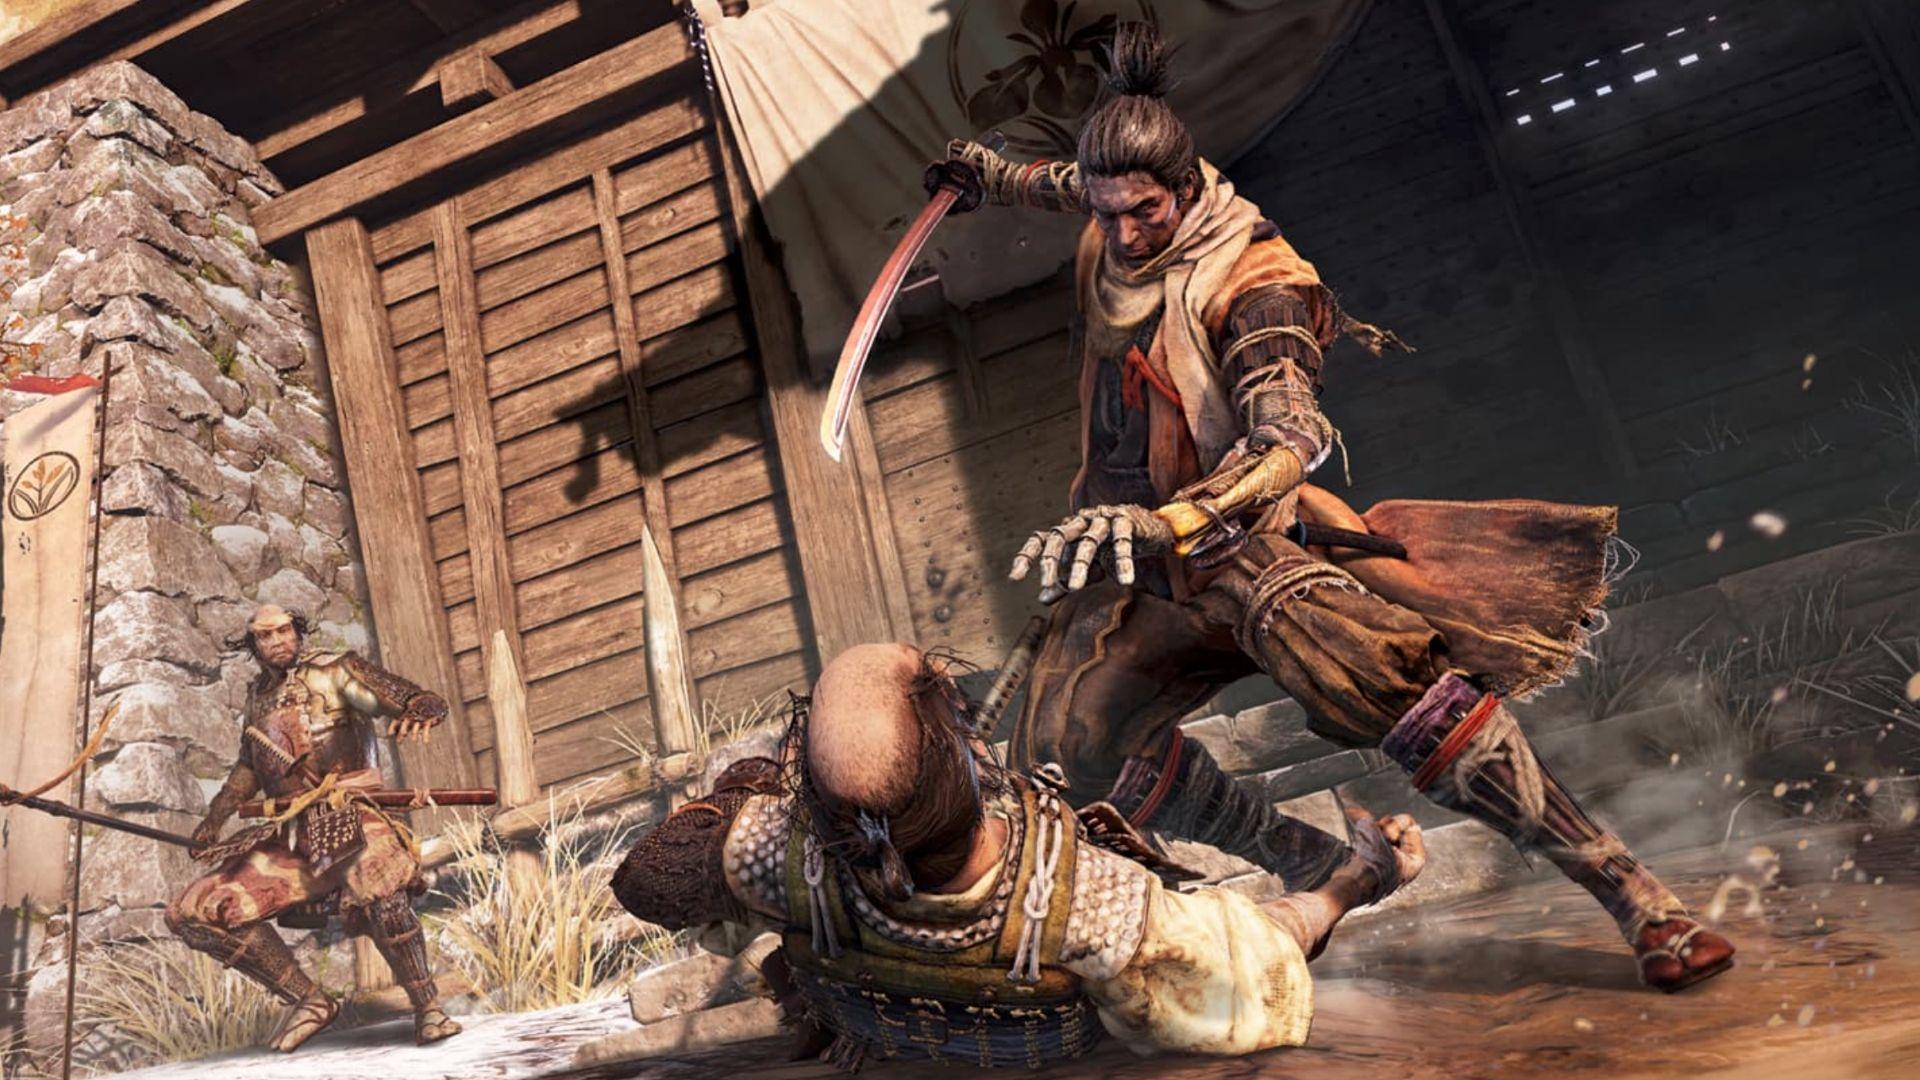 Watch 12 Minutes Of Gameplay From Sekiro: Shadows Die Twice